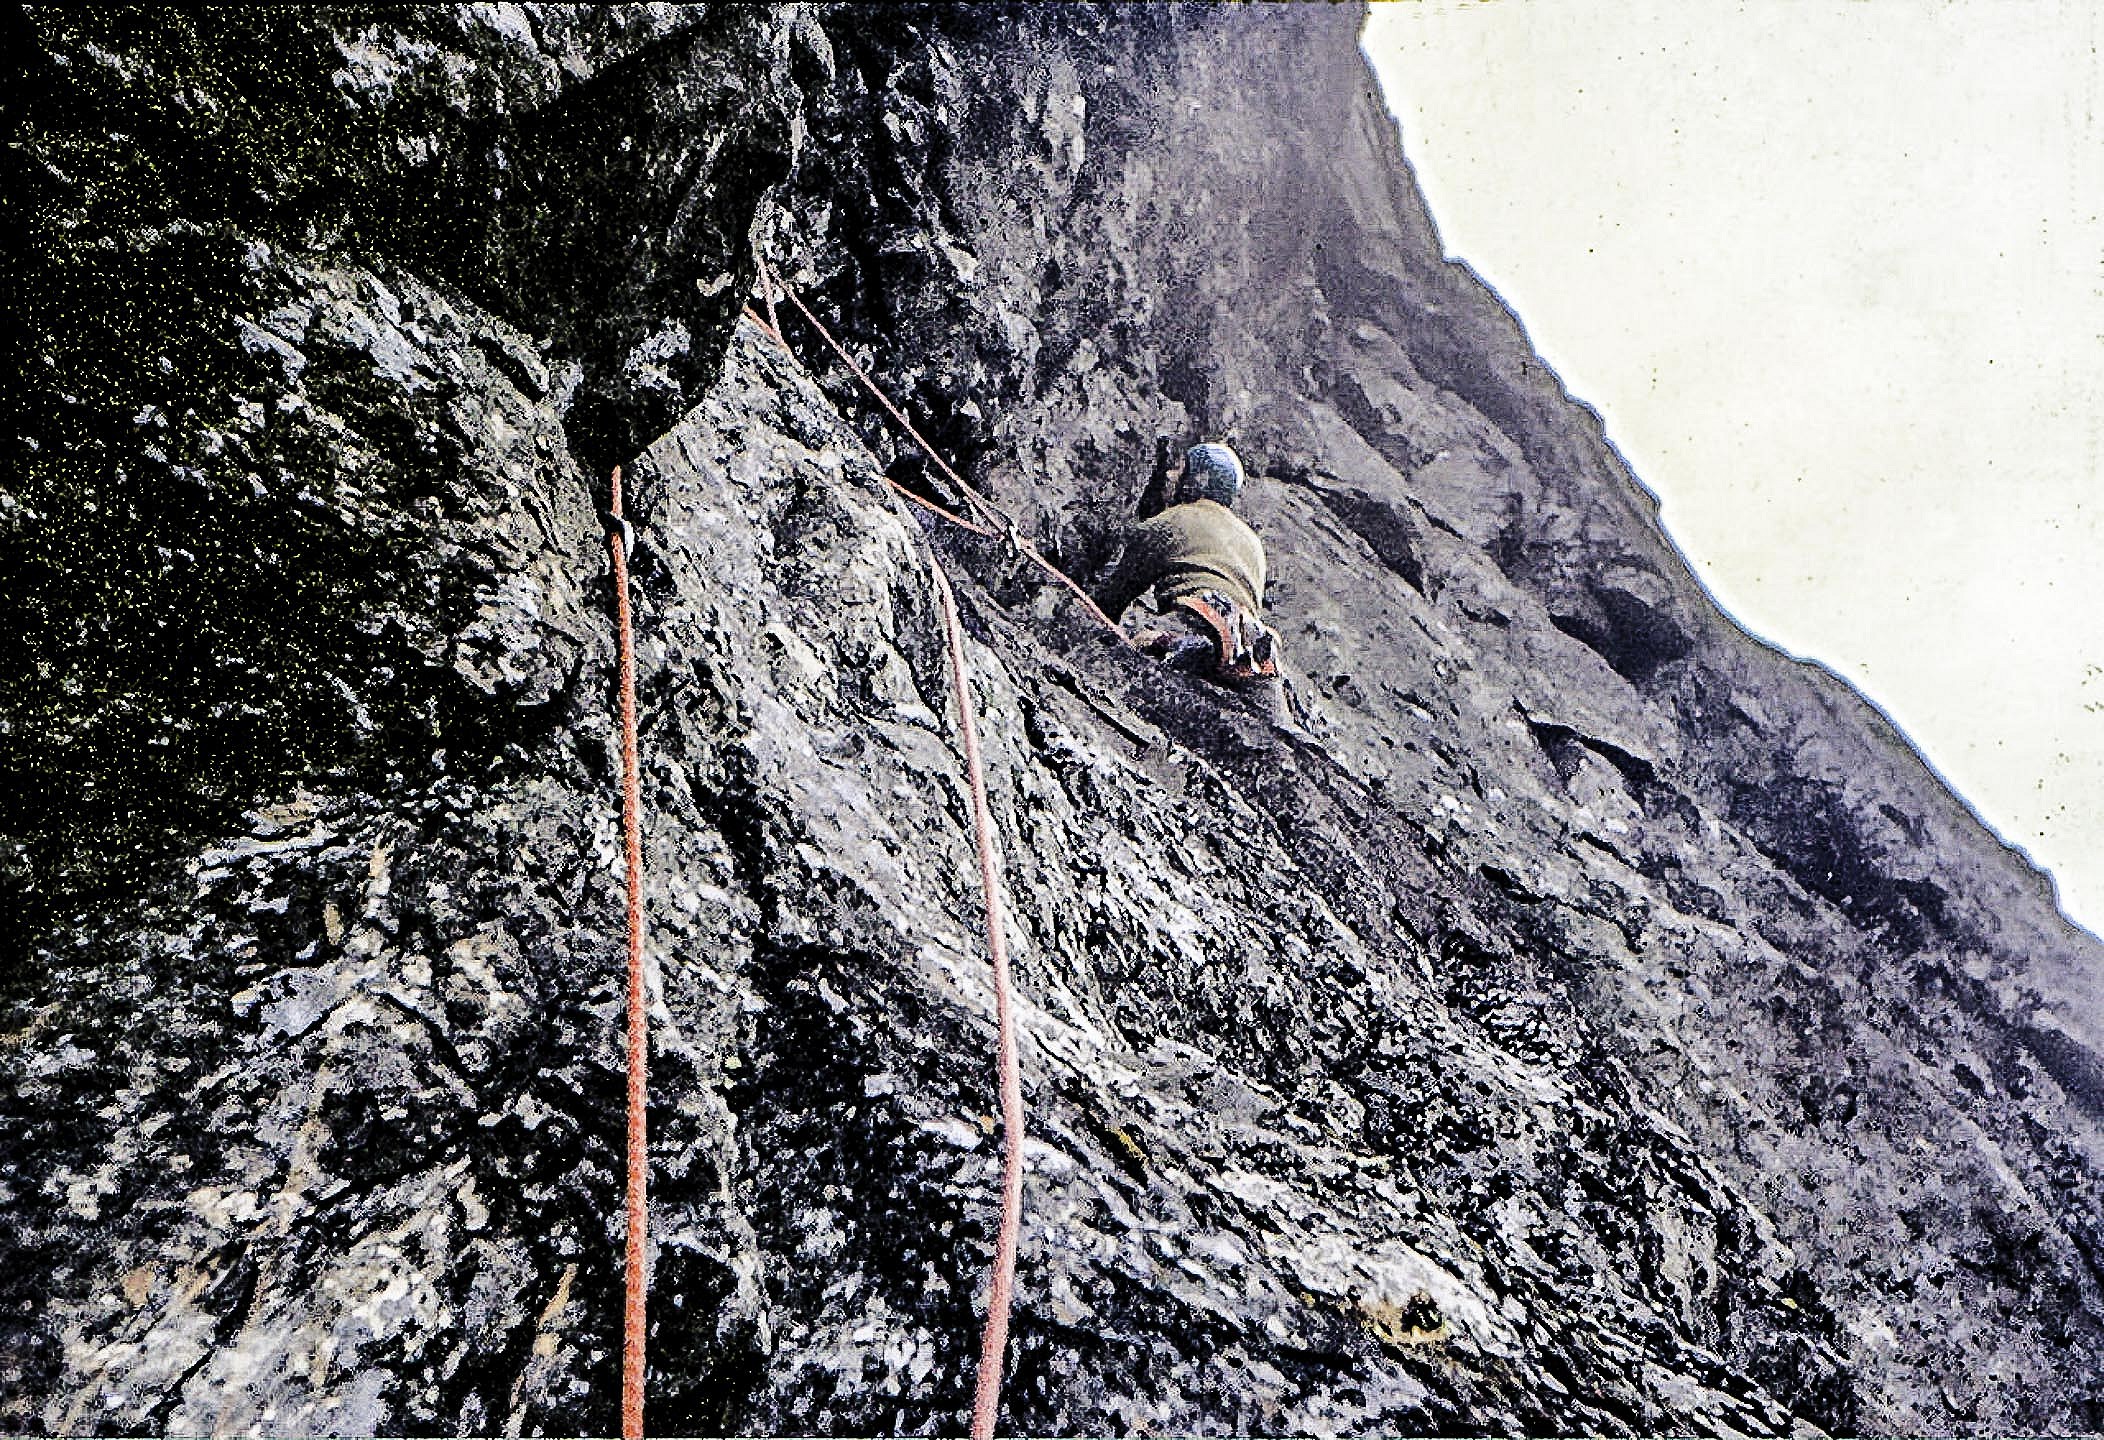 First ascent photo of Colin Read on crux pitch of Deimos Eagle Crag Buttermere October 1972. Photo by Johnny Adams   © Tony Marr